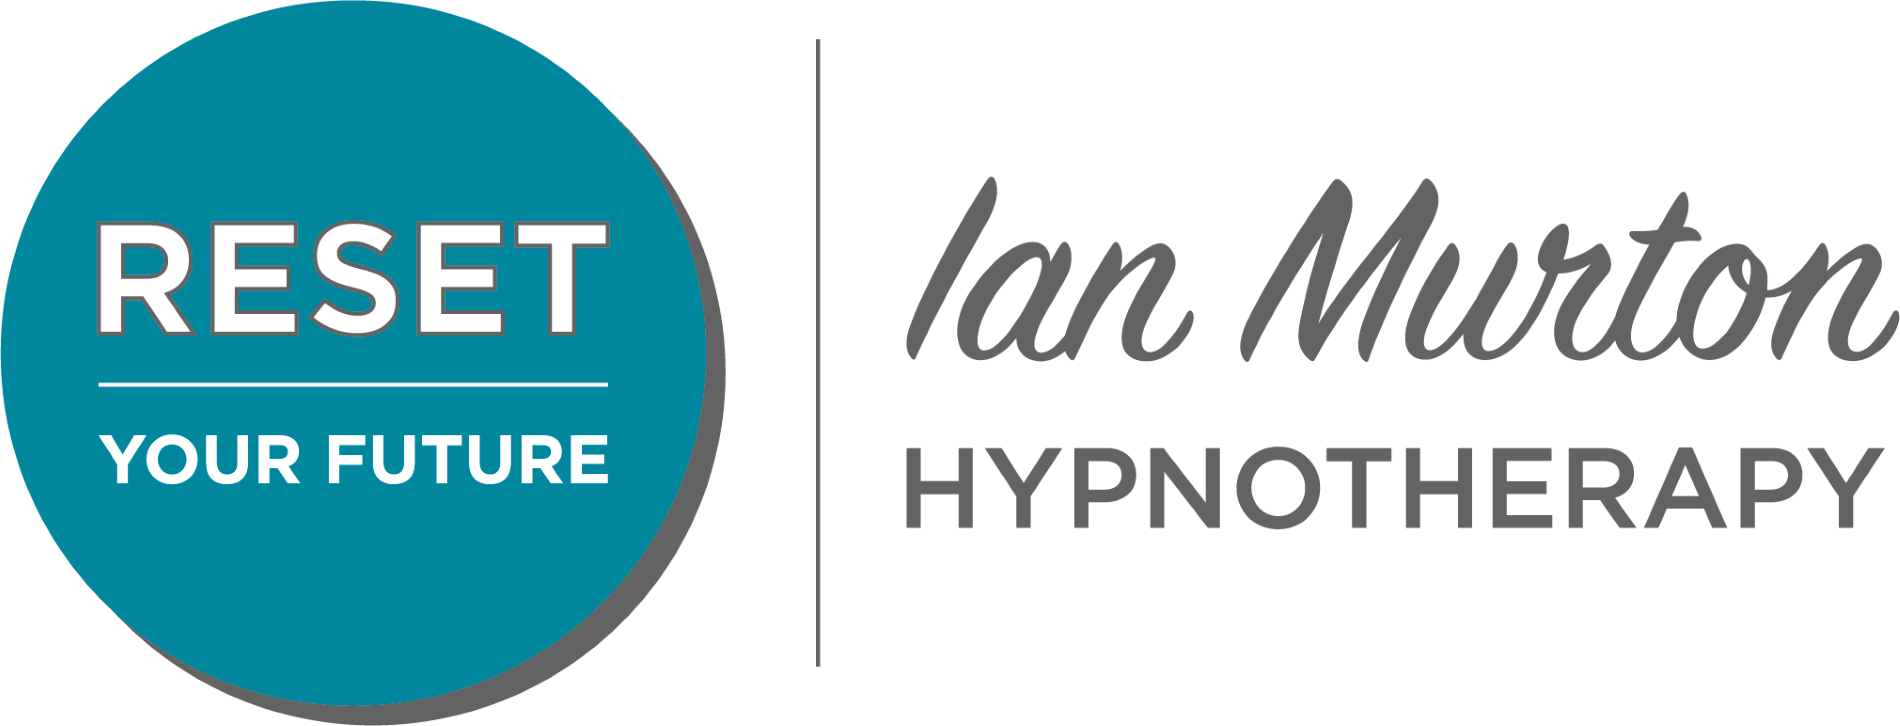 Logo of Ian Murton Hypnotherapy Alternative And Complementary Medicines And Therapies In Hitchin, Hertfordshire